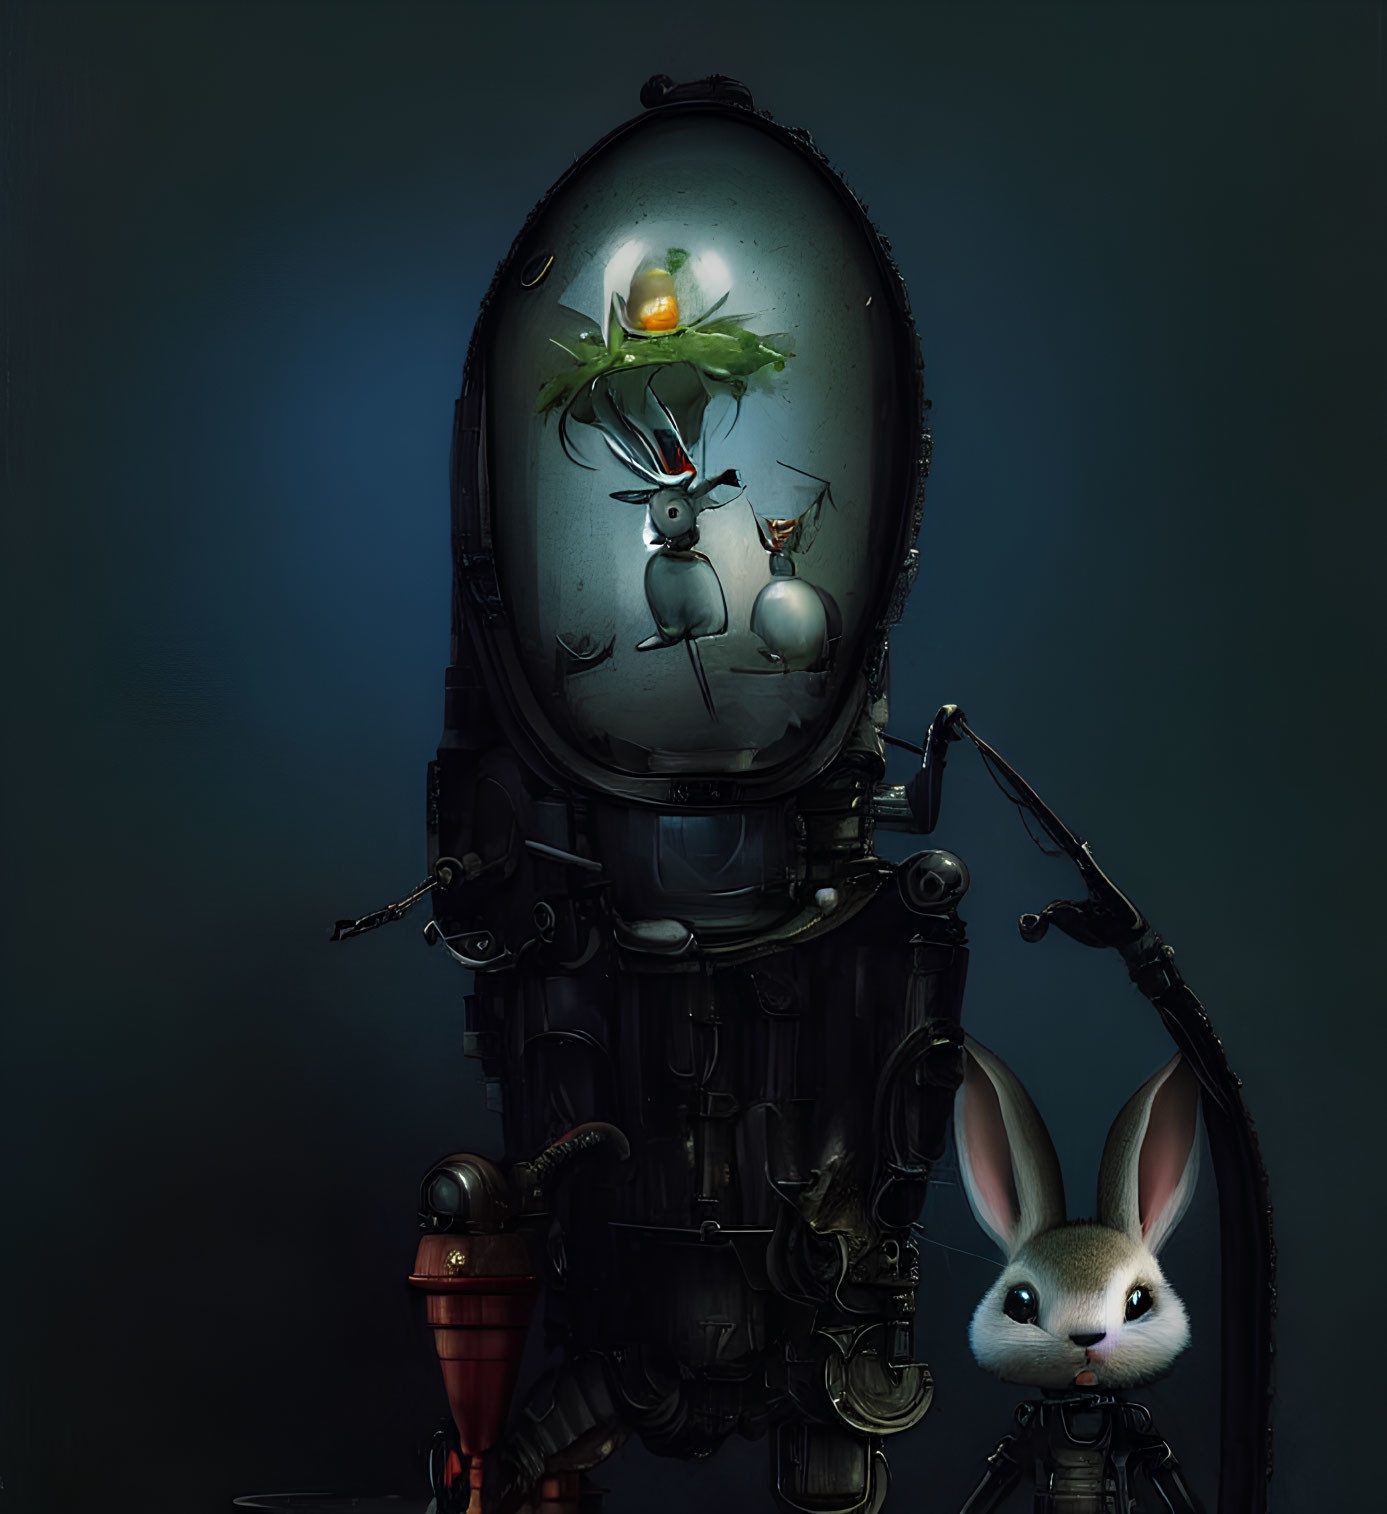 Anthropomorphic rabbit in spacesuit next to intricate mechanical suit with carrot in glass dome